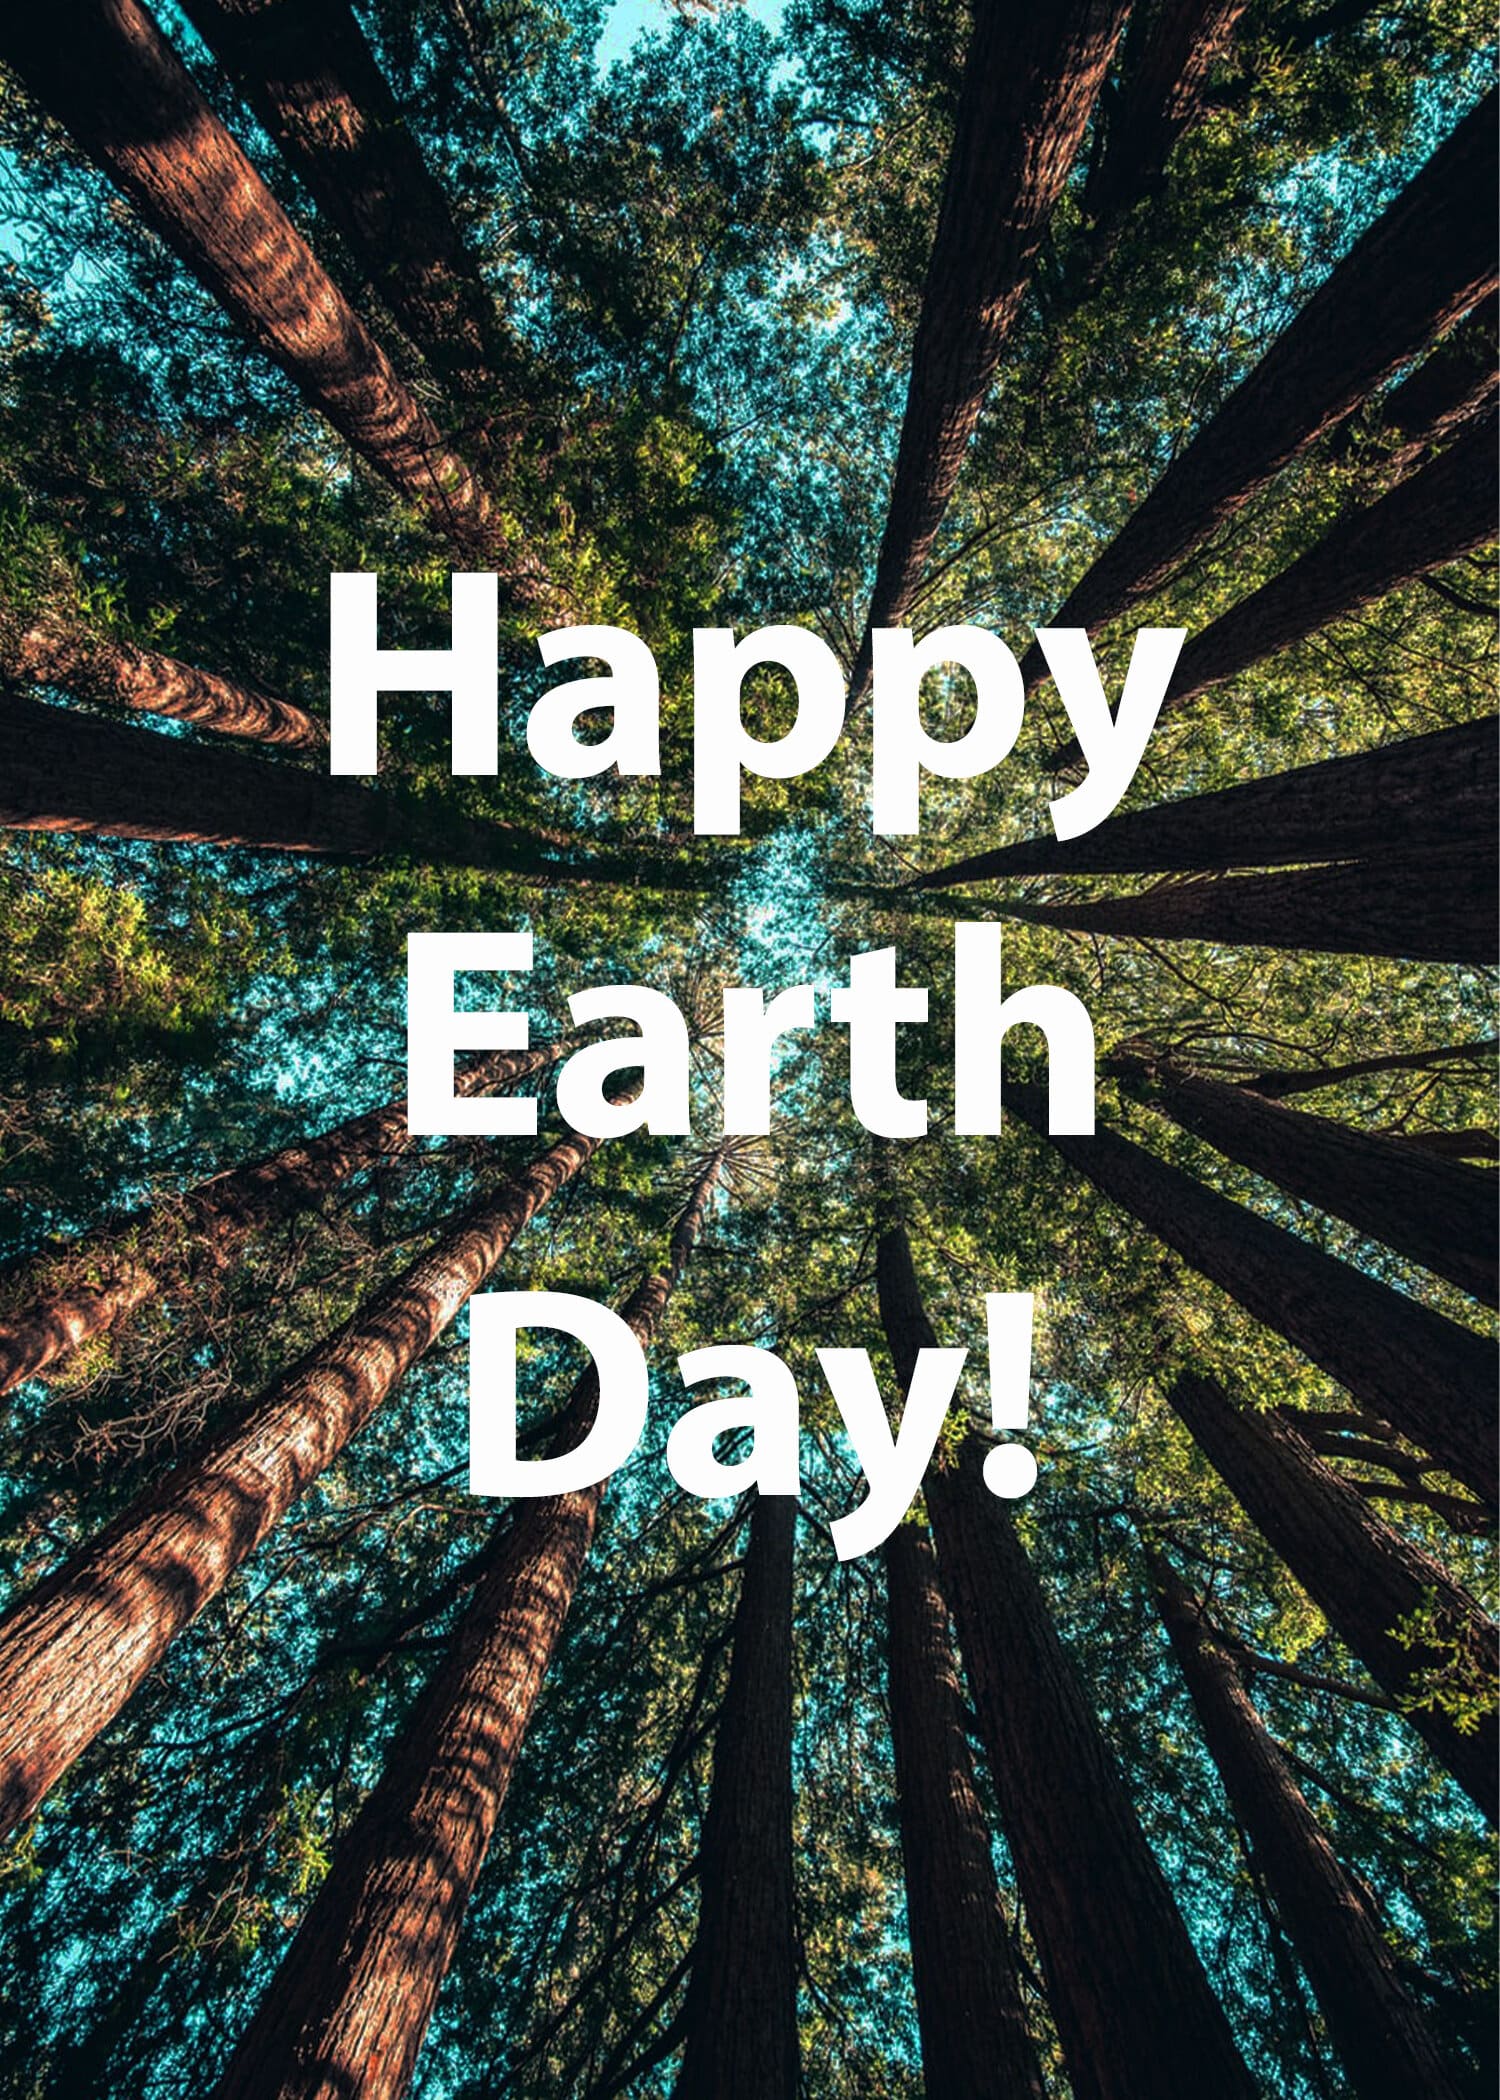 Earth day is April 22nd!